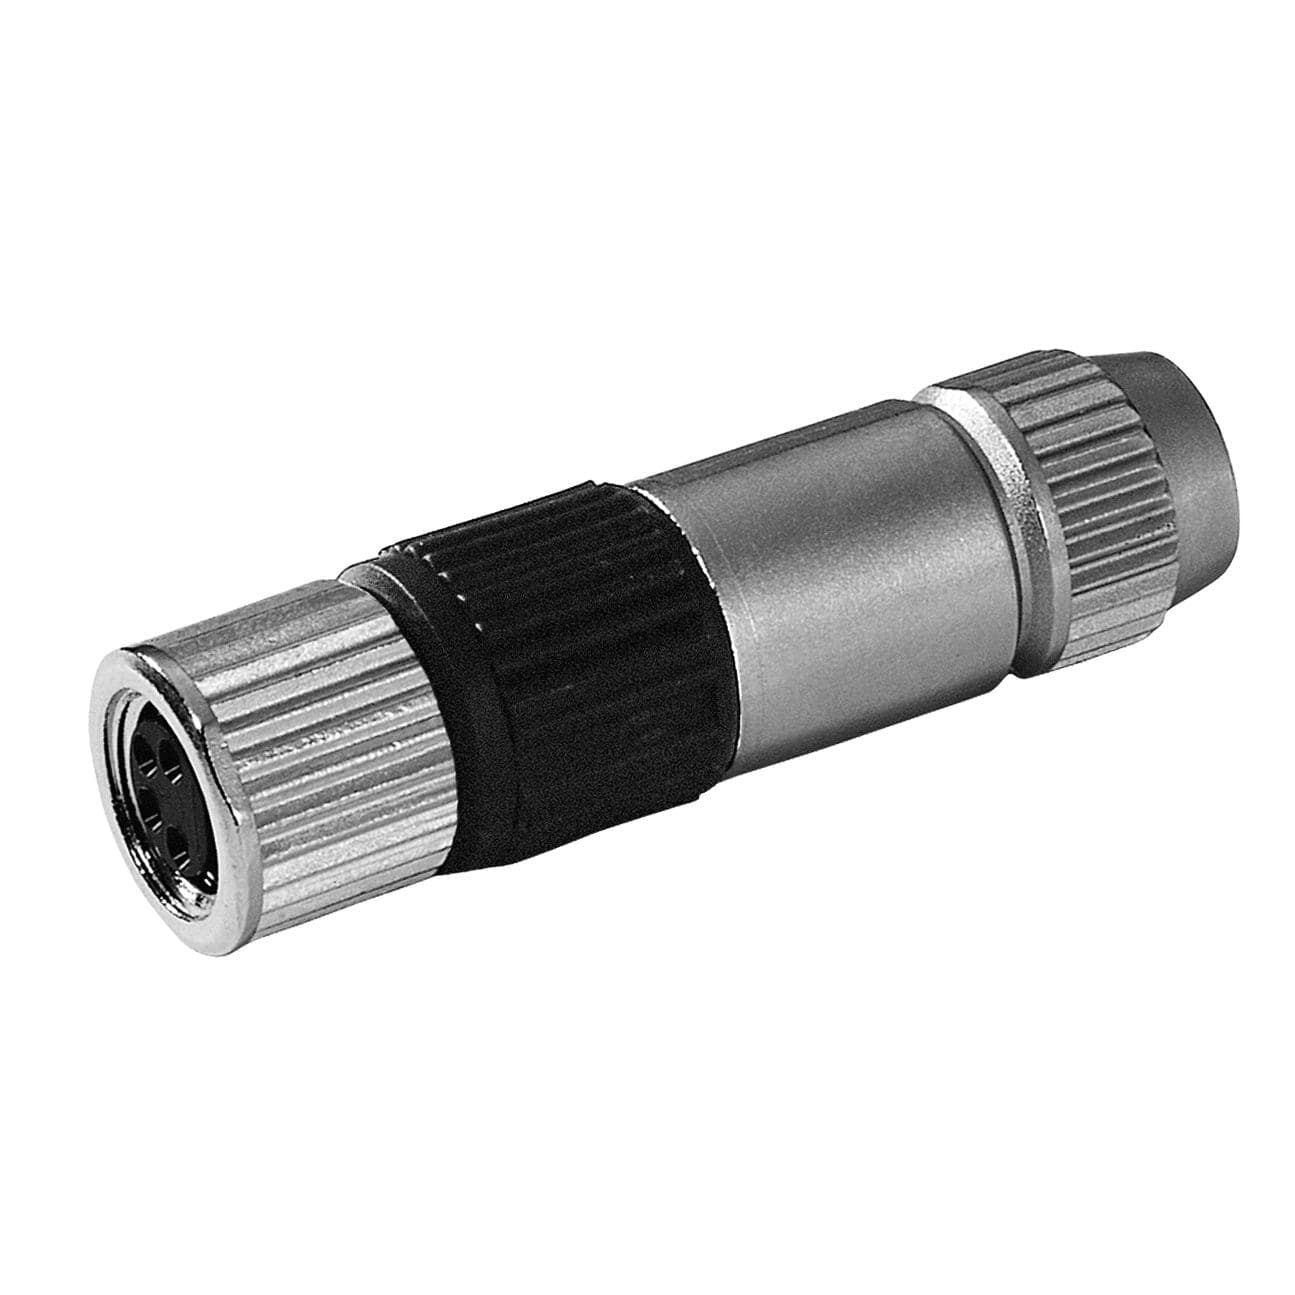 Field attachable connectors M8 Straight SOCKET 3 poles 0.14 0.34 mm2 NO LED